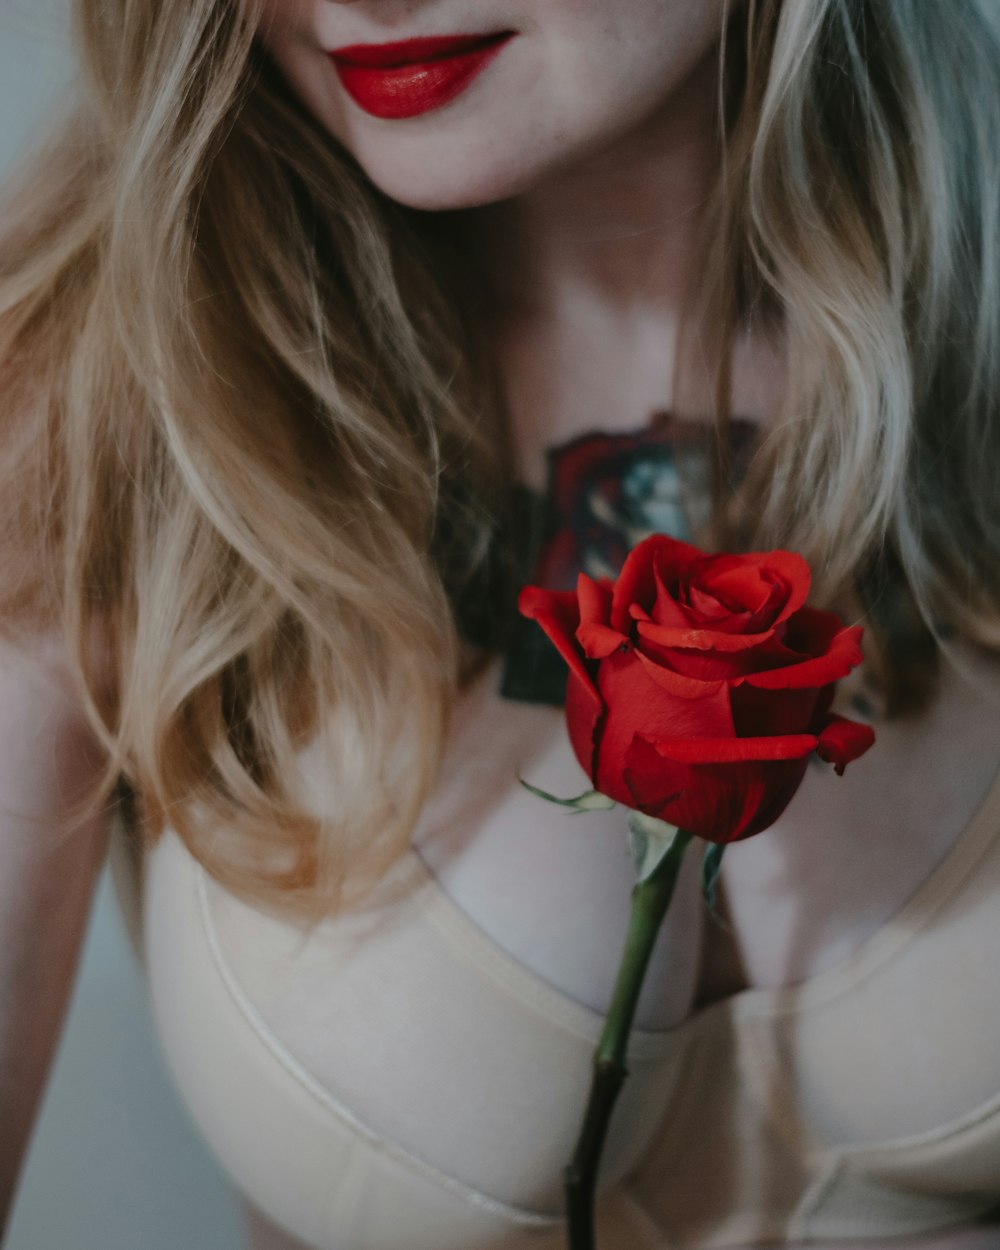 Woman in white tank top holding red rose photo – Free Lips and a flower  Image on Unsplash